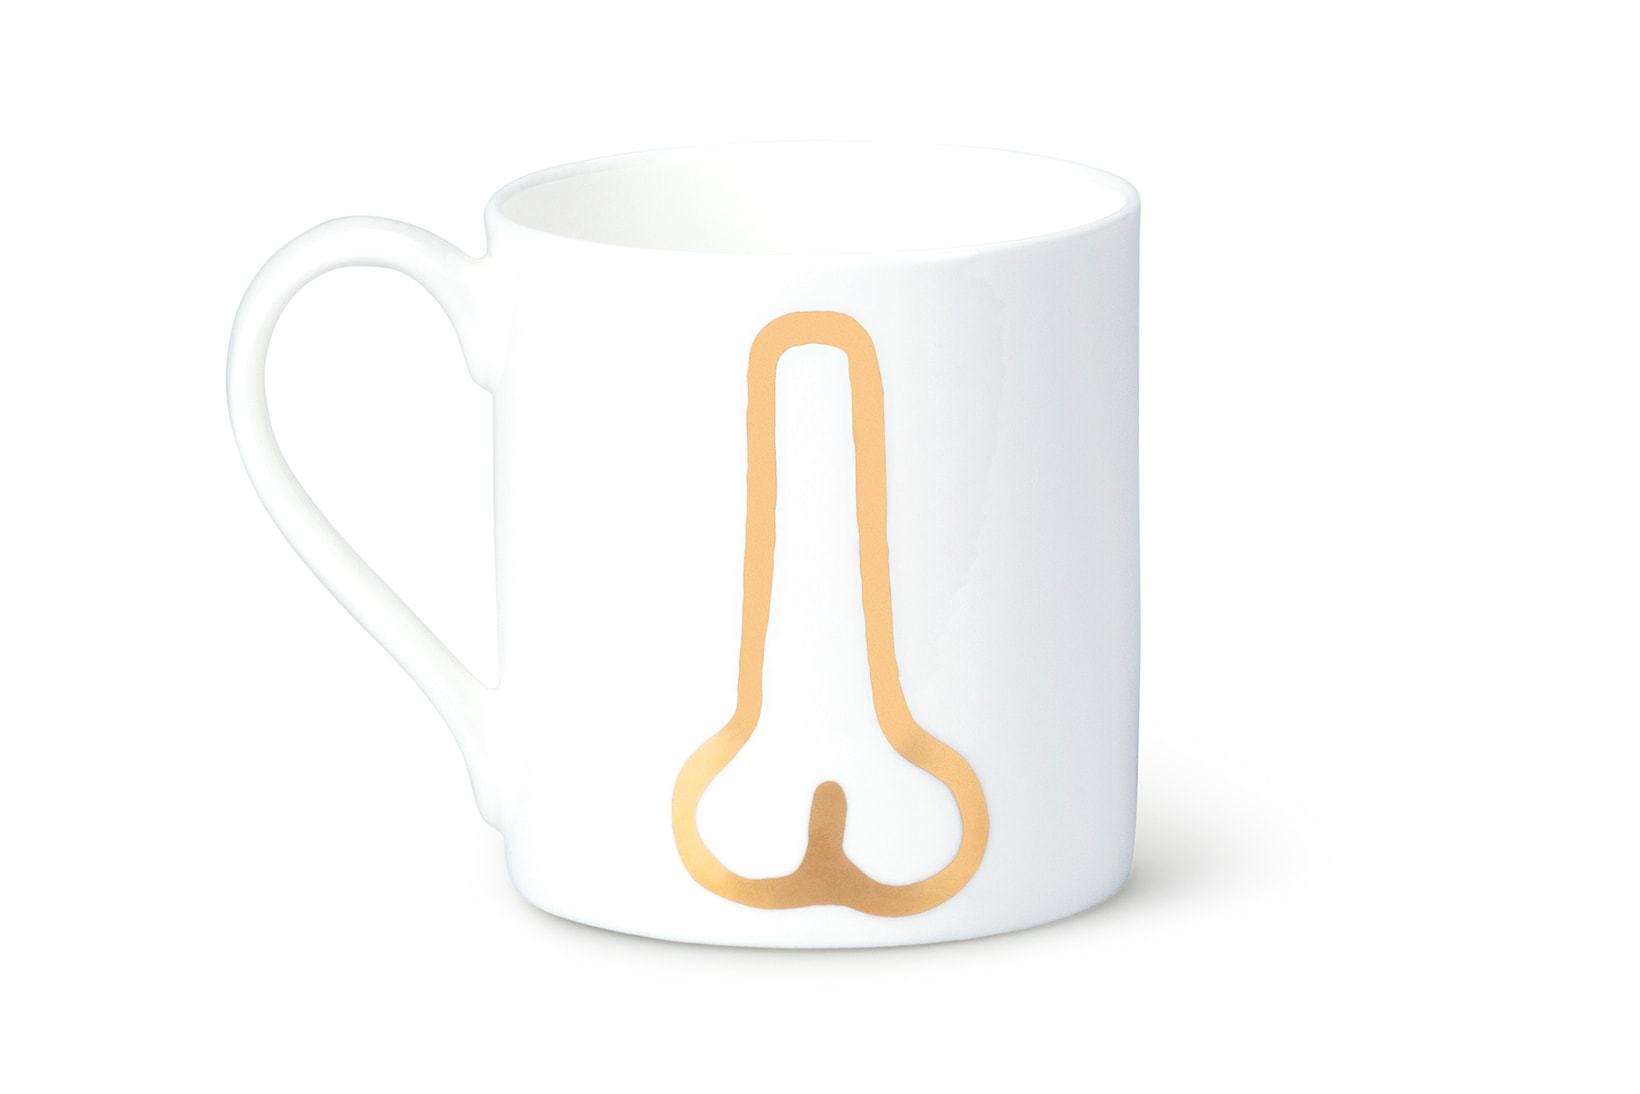 Jeremy Deller x Aries Penis Willy Cup Mug Plate